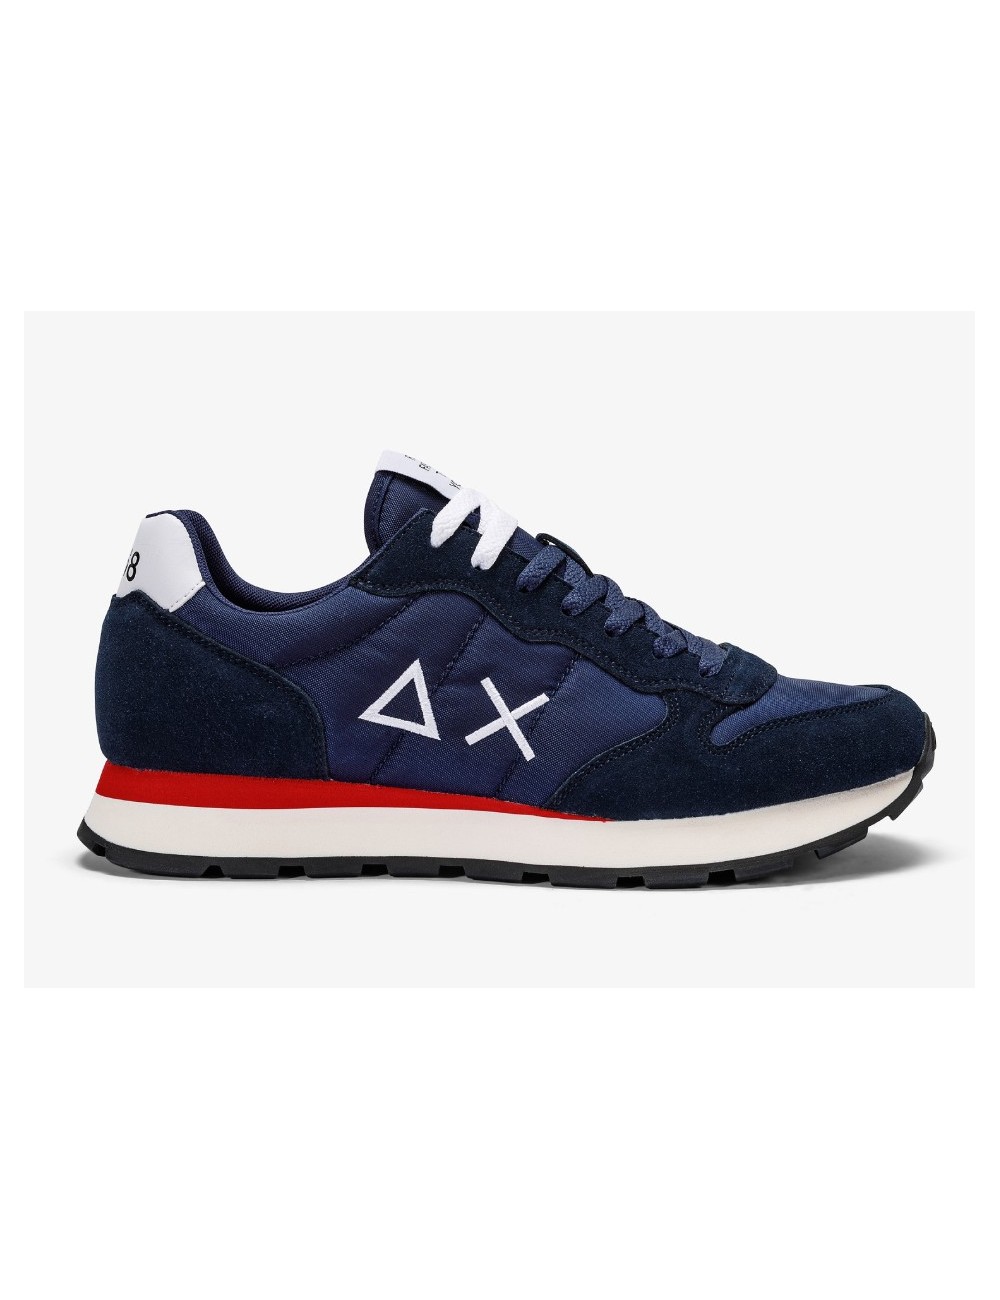 SNEAKERS TOM SOLID NYLON NAVY BLUE